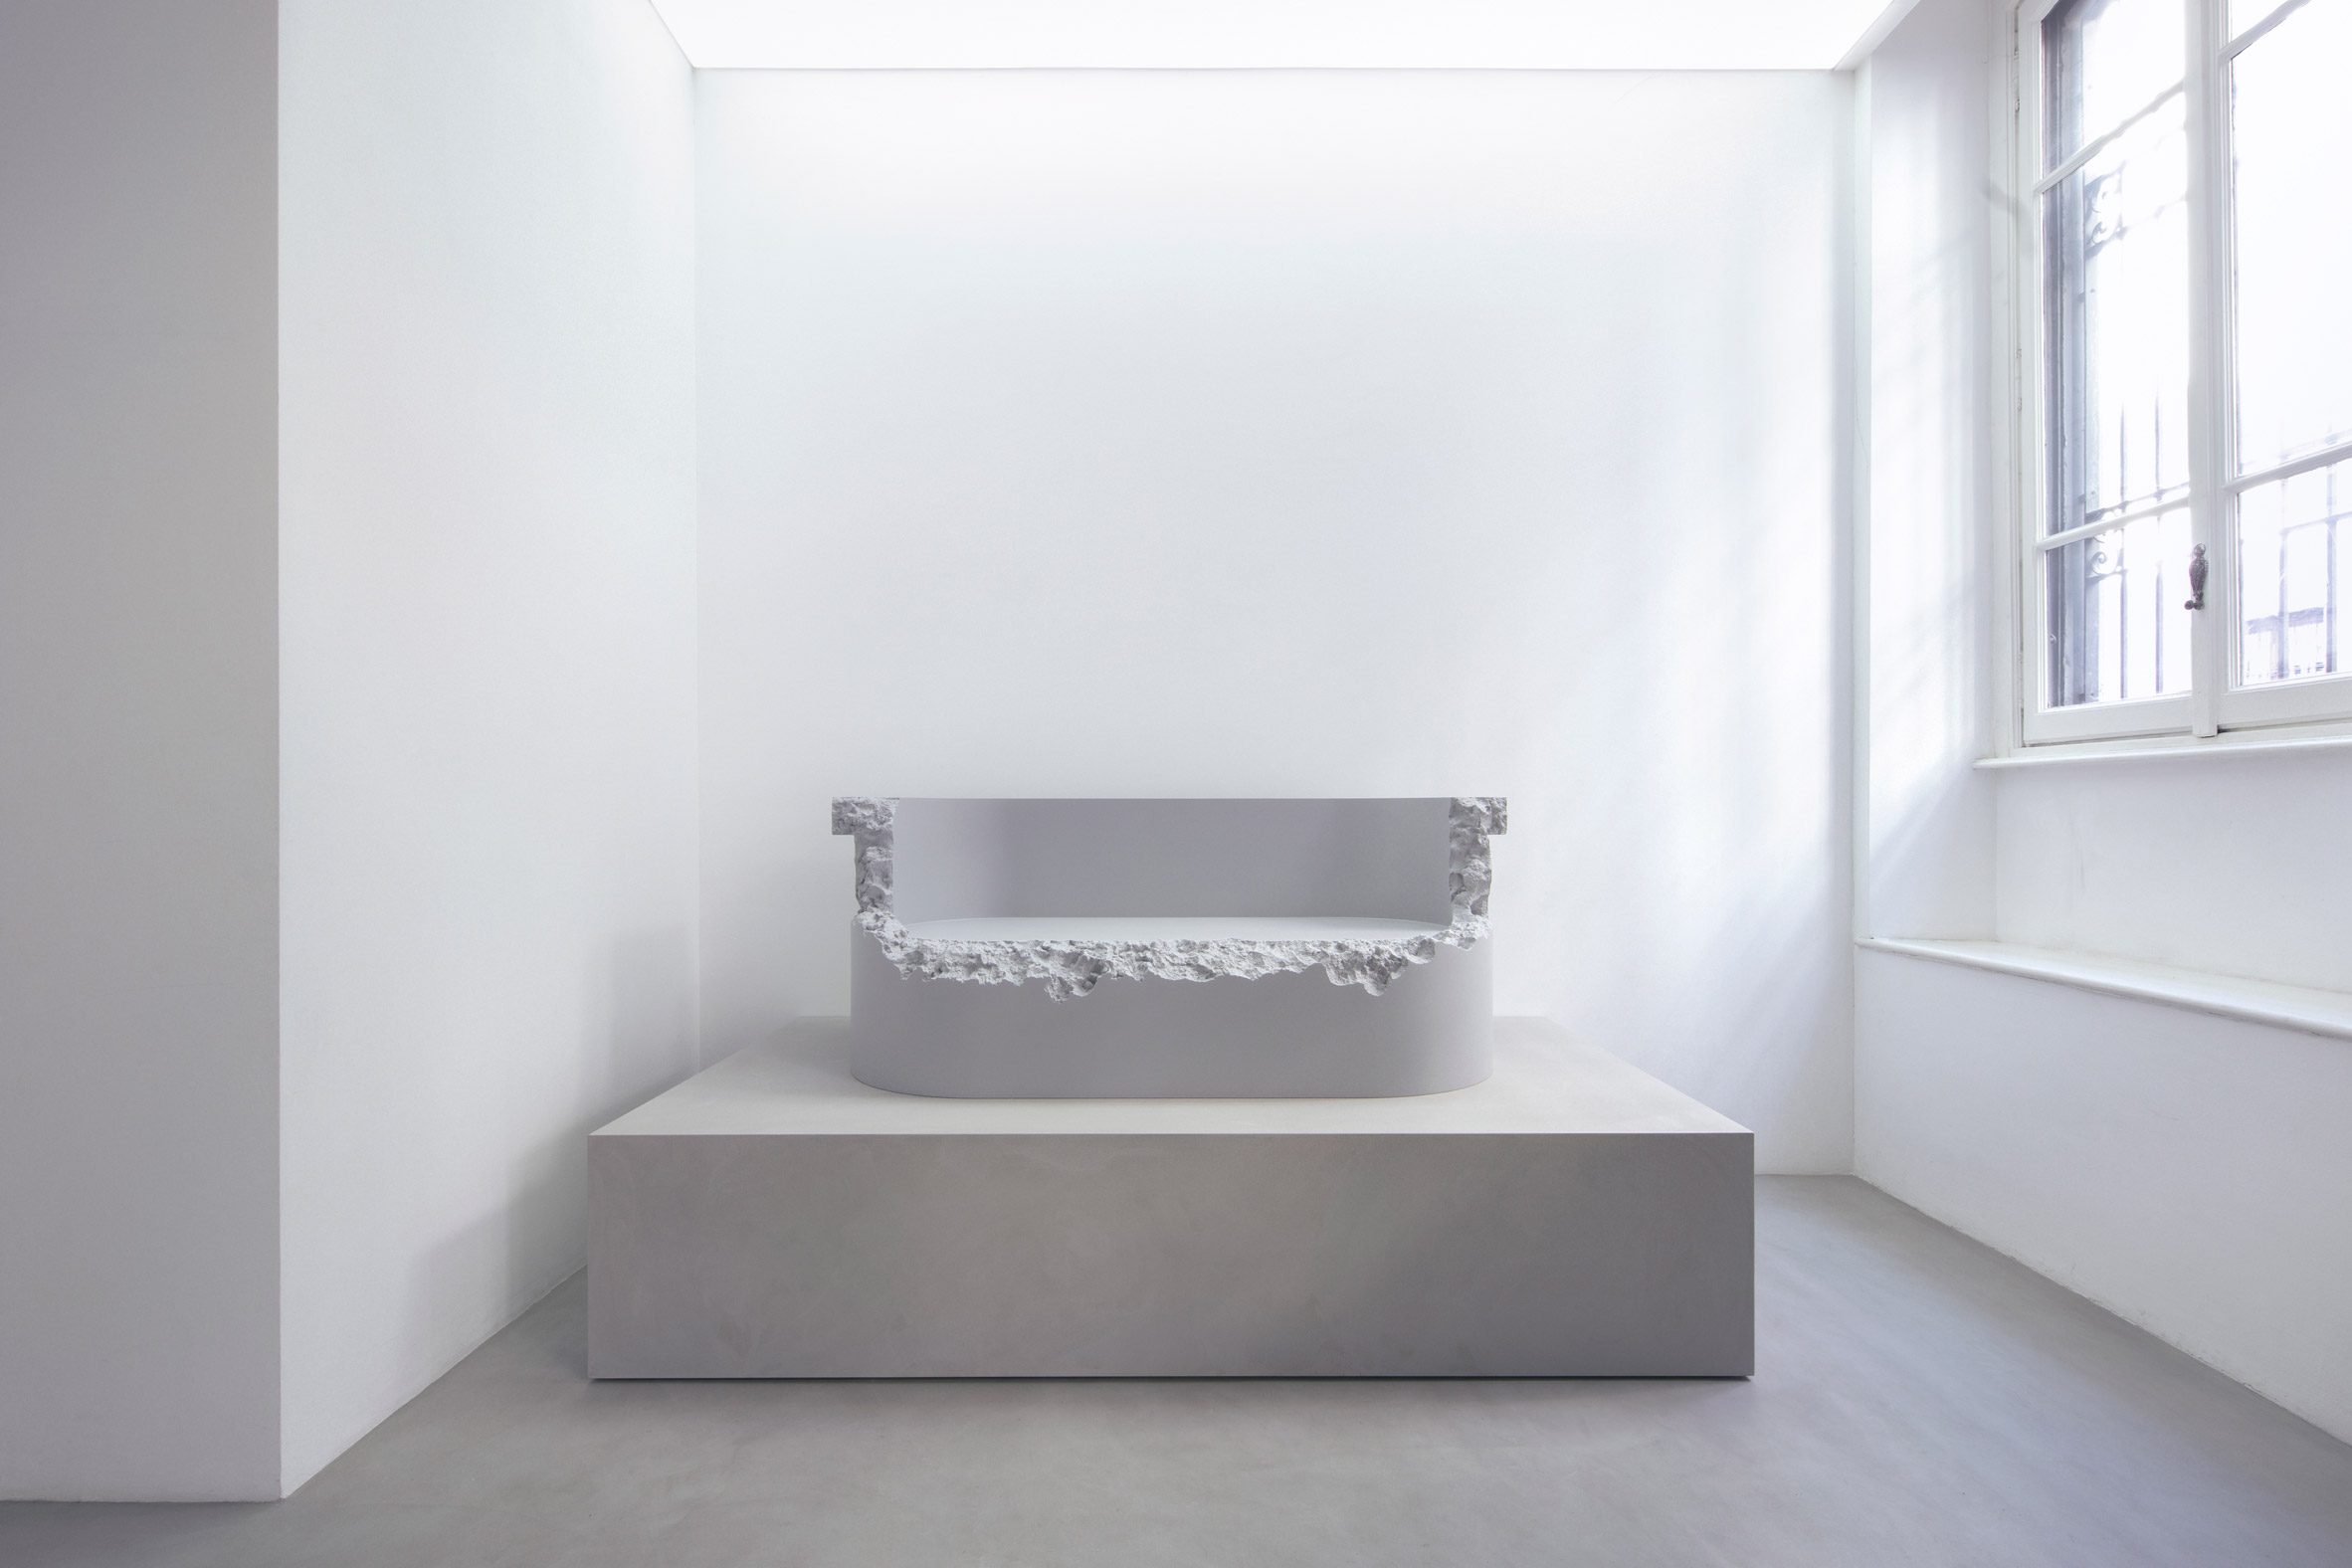 Bench on display at Break to Make exhibition at Nendo office